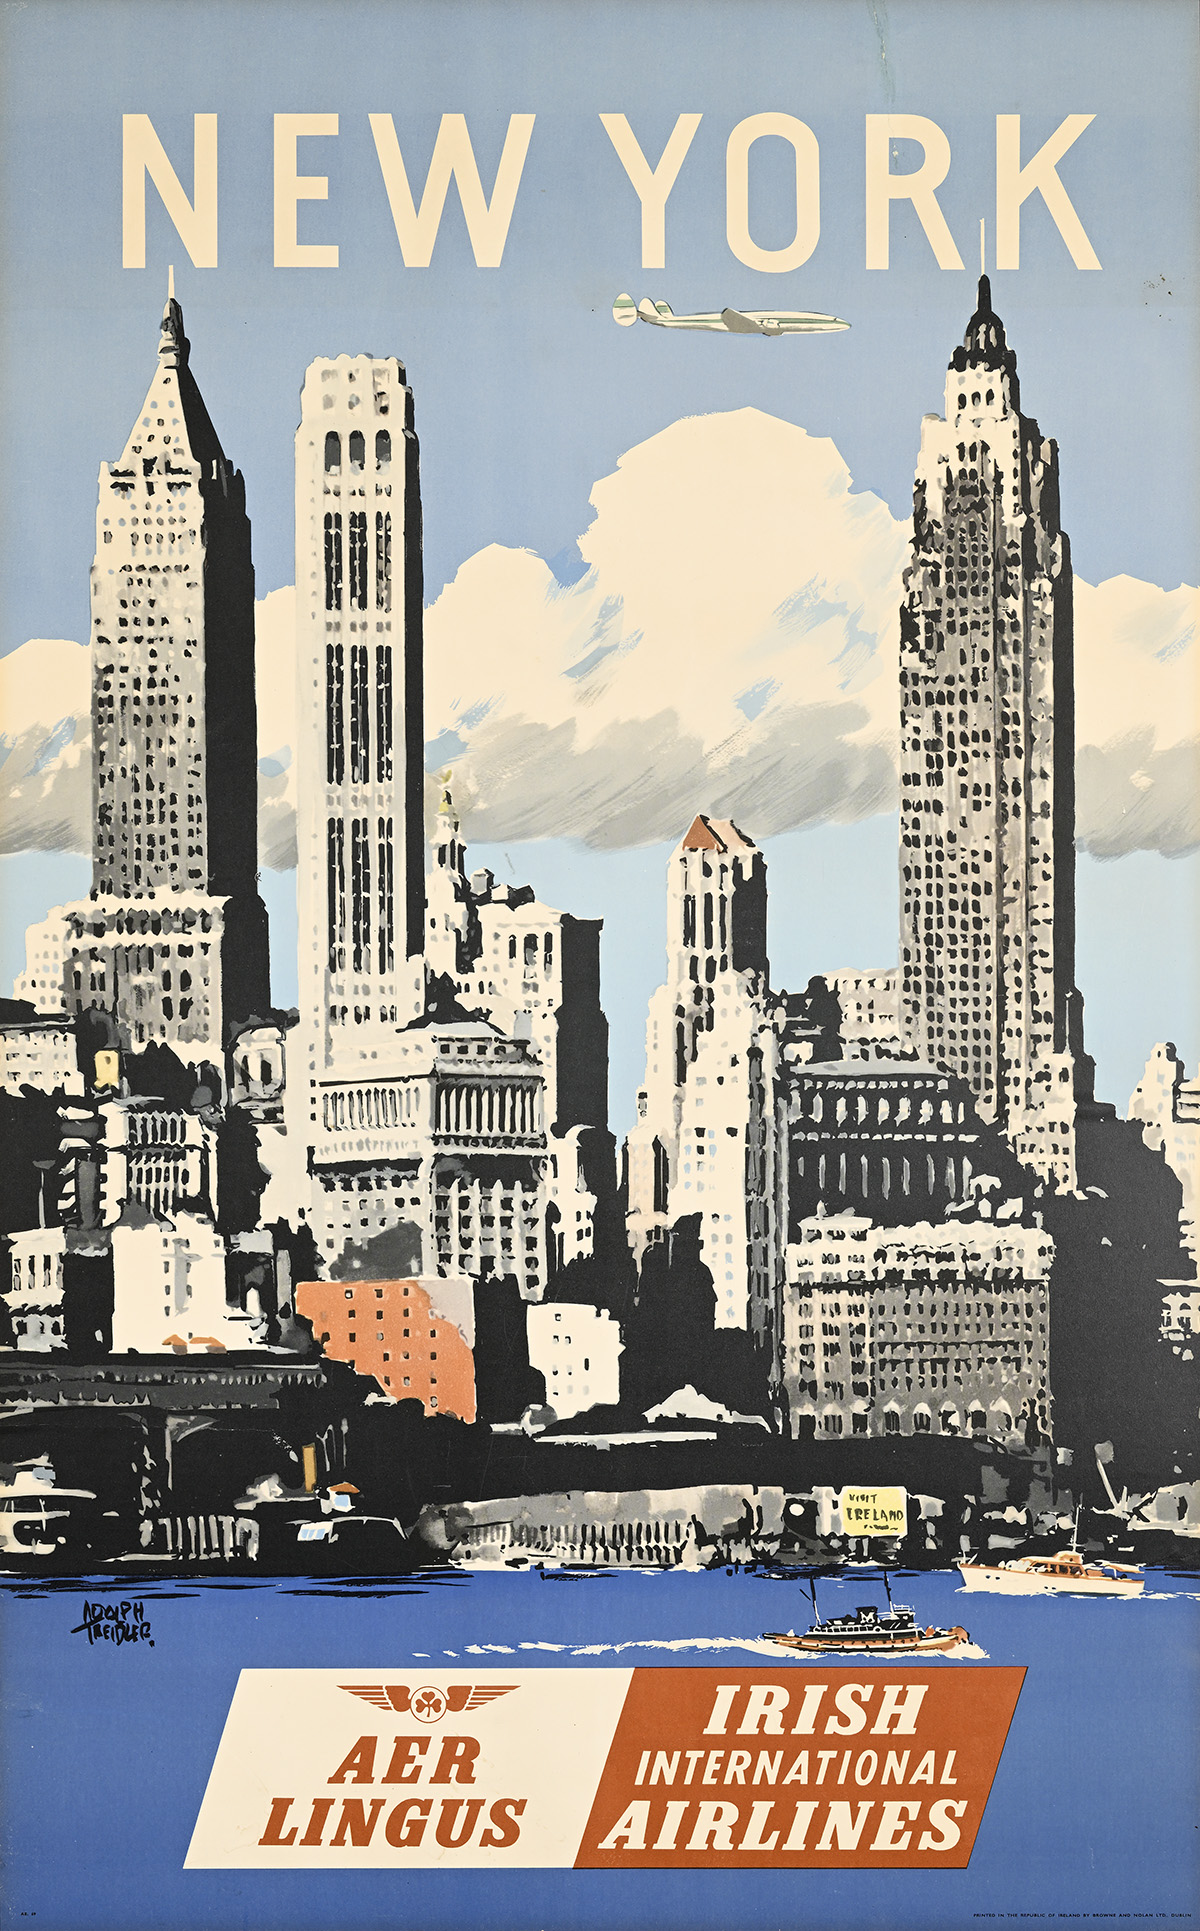 A gritty poster of gray skyscrapers and an active harbor, with a plane flying in the background.